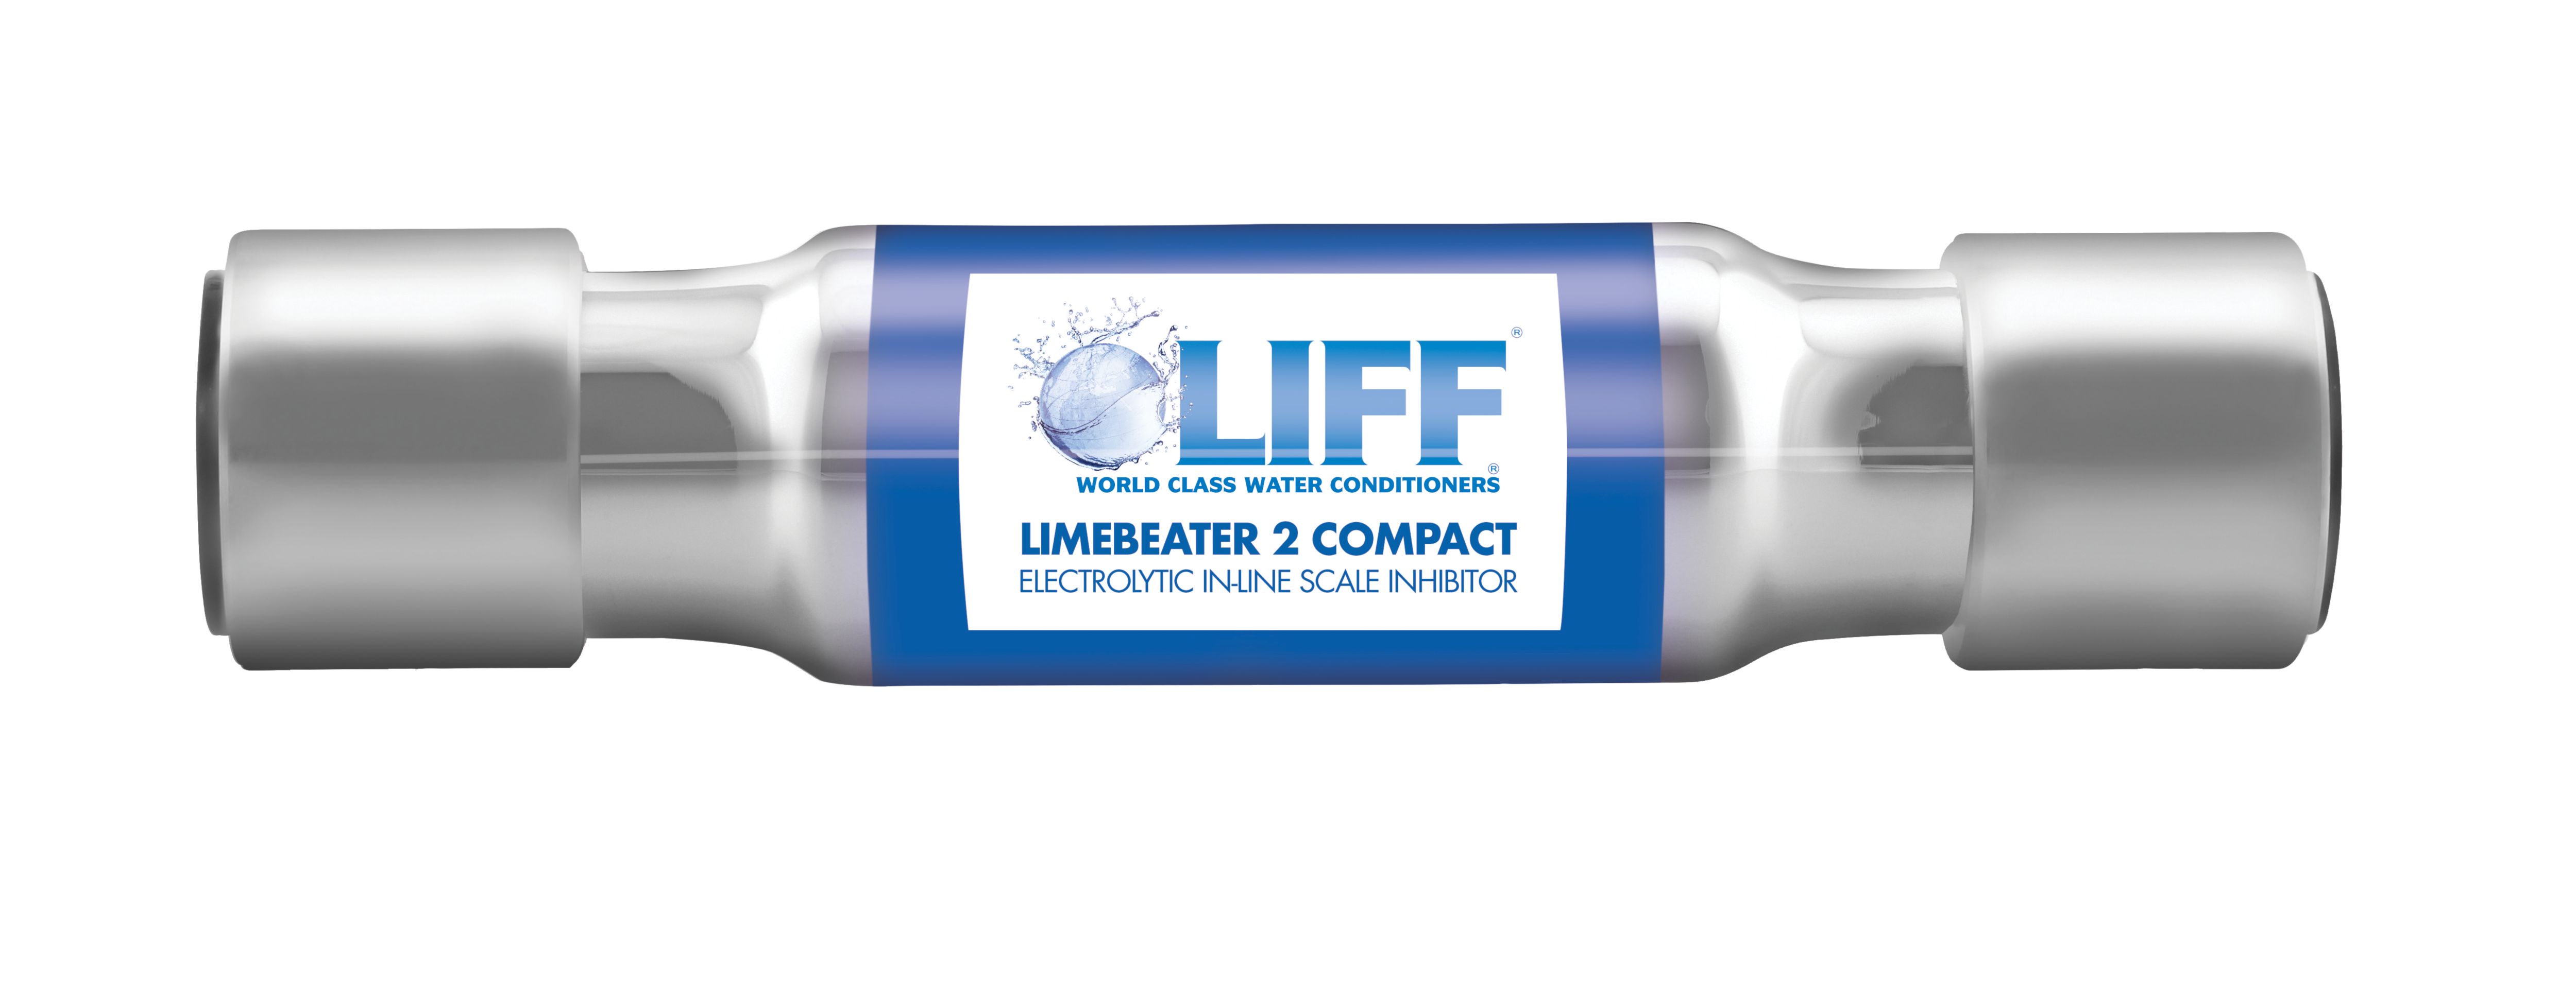 Image of Liff Limebeater Compression Electrolytic Compact Push-fit Scale Inhibitor - 15mm